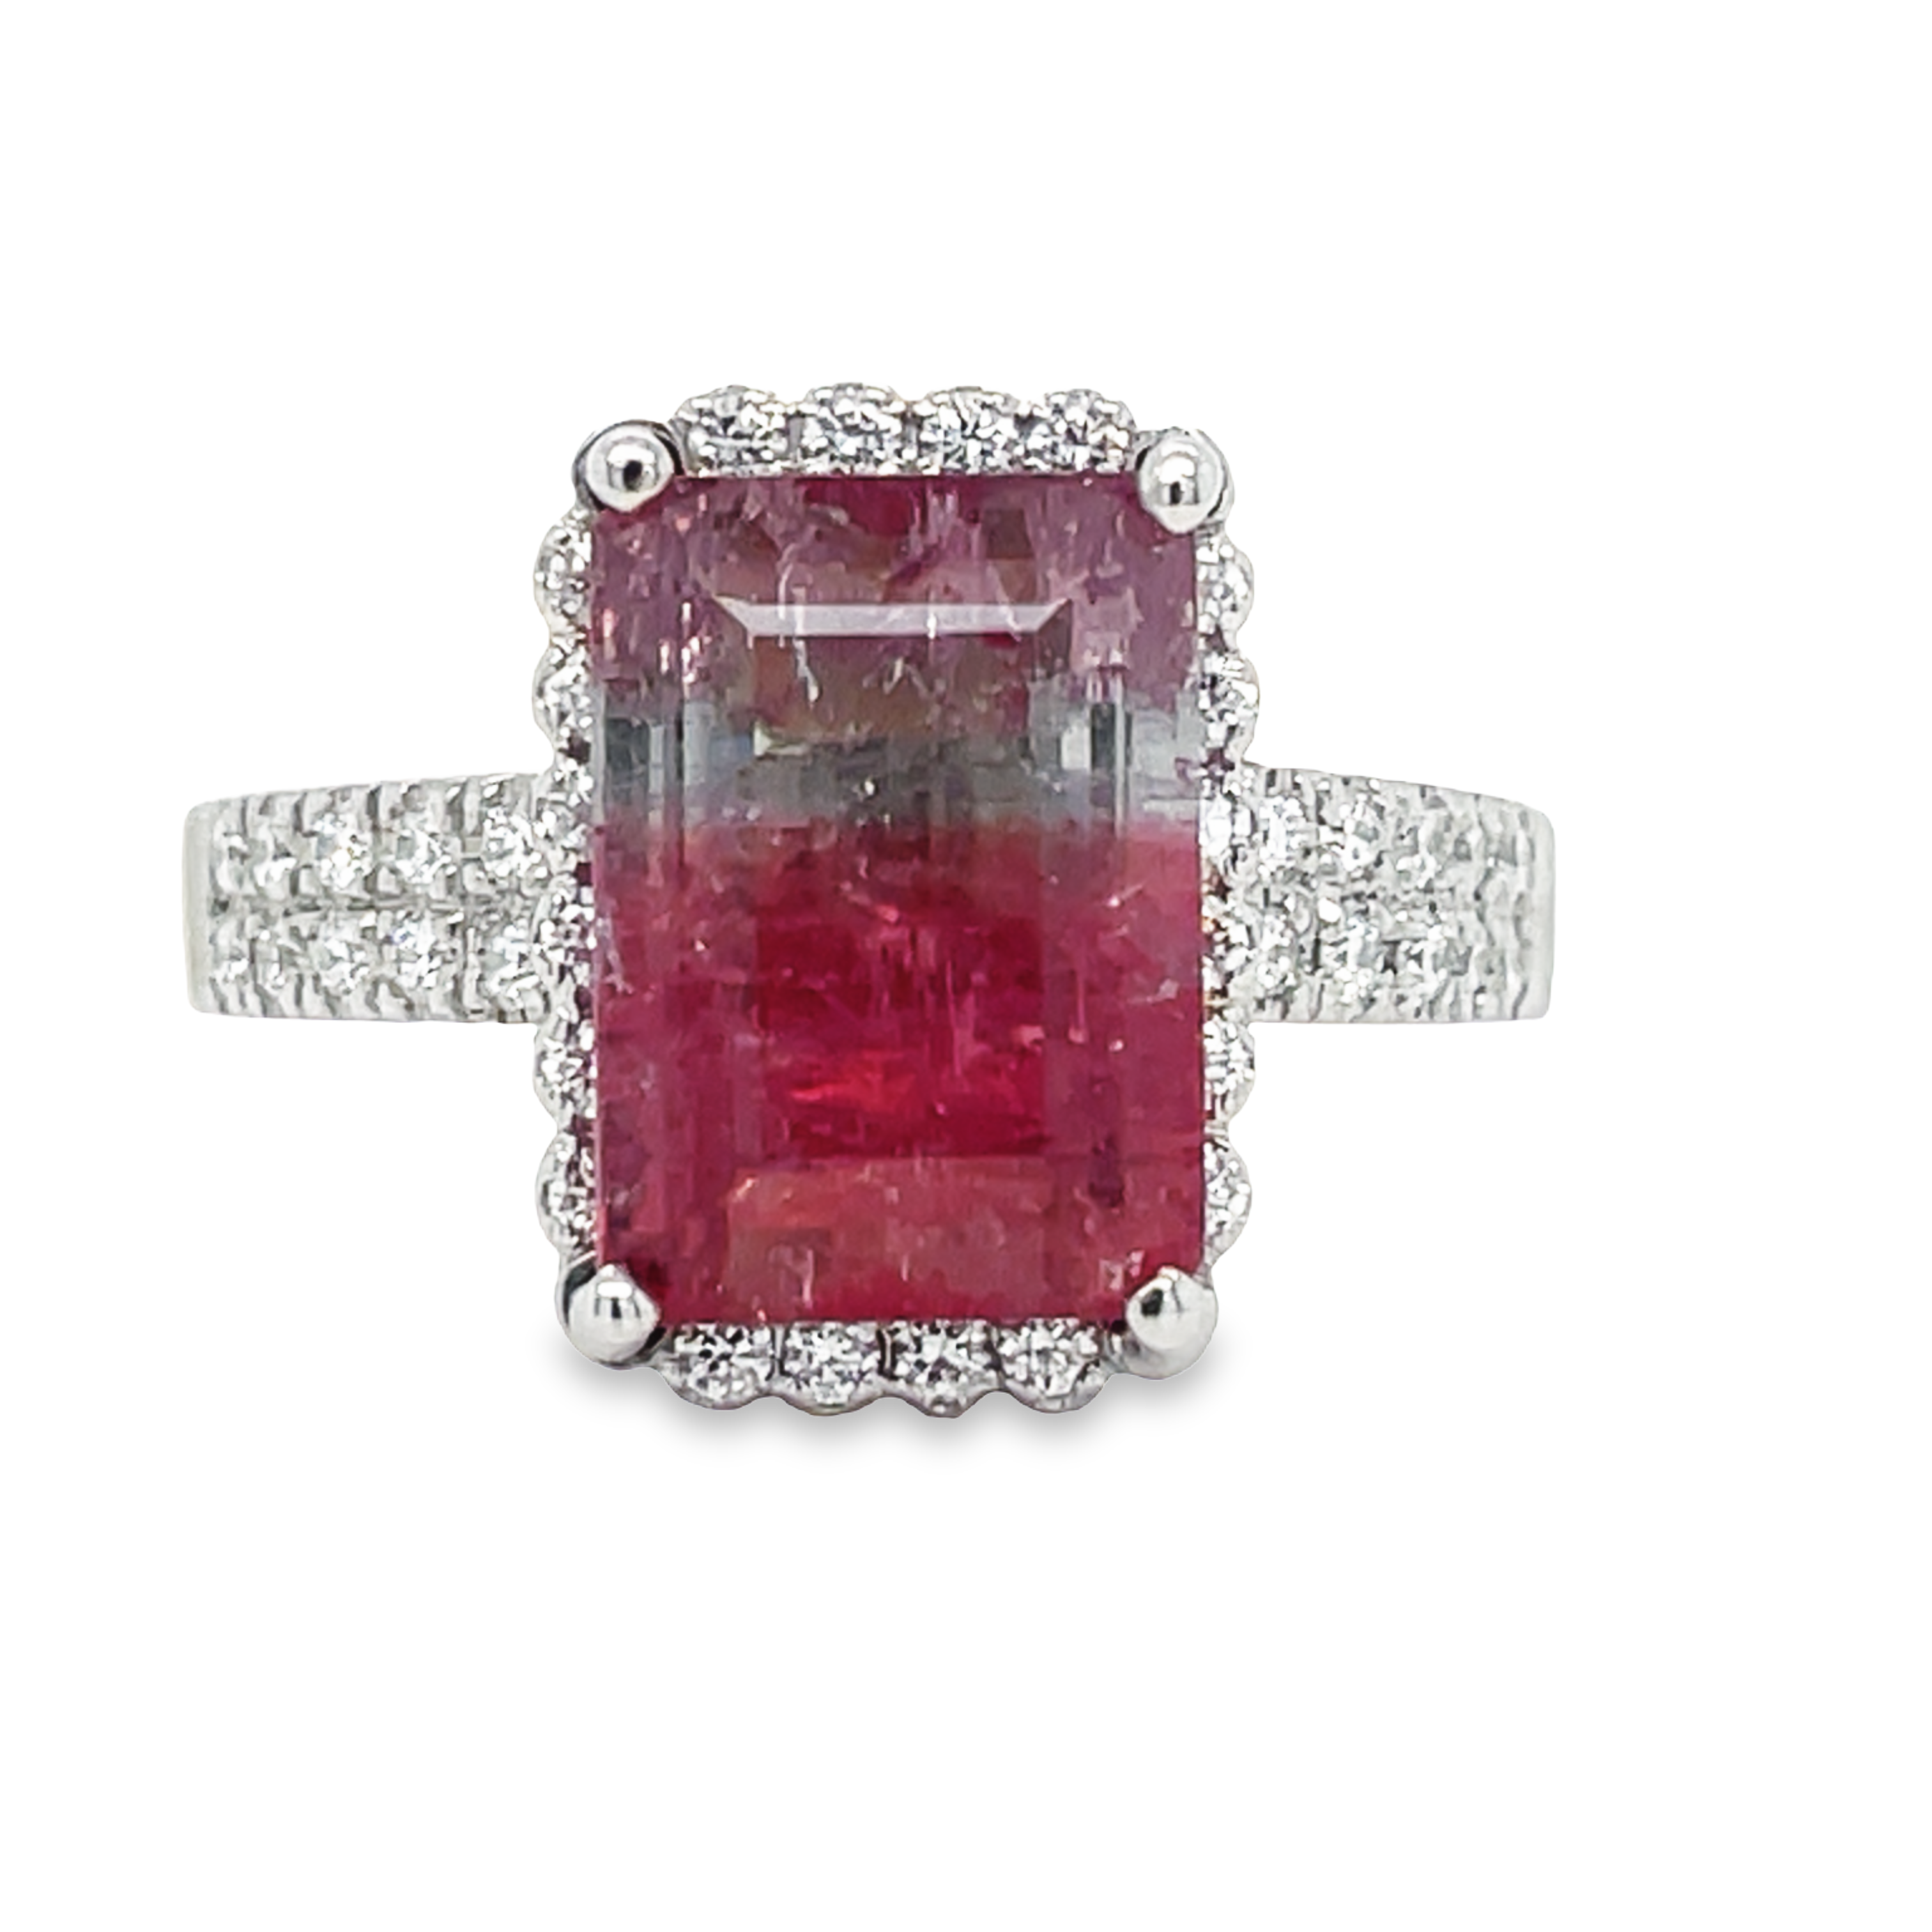 This exquisite pink tourmaline and diamond cocktail ring is crafted in-house with 14k white gold. The rectangular central tourmaline is complemented by a halo of 0.80 cts of diamonds, creating a unique look perfect for special occasions. An elegant and memorable piece of jewelry.